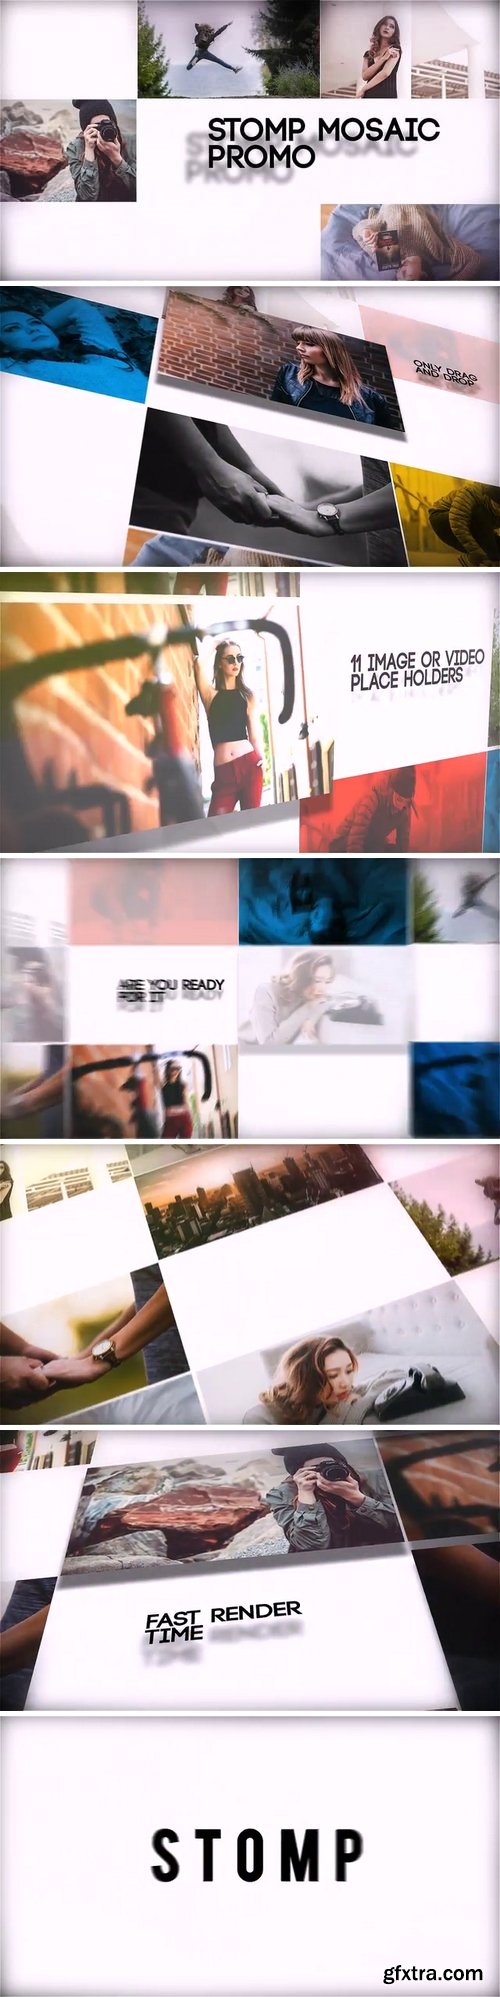 MotionArray - Stomp Mosaic Promo After Effects Templates 61130